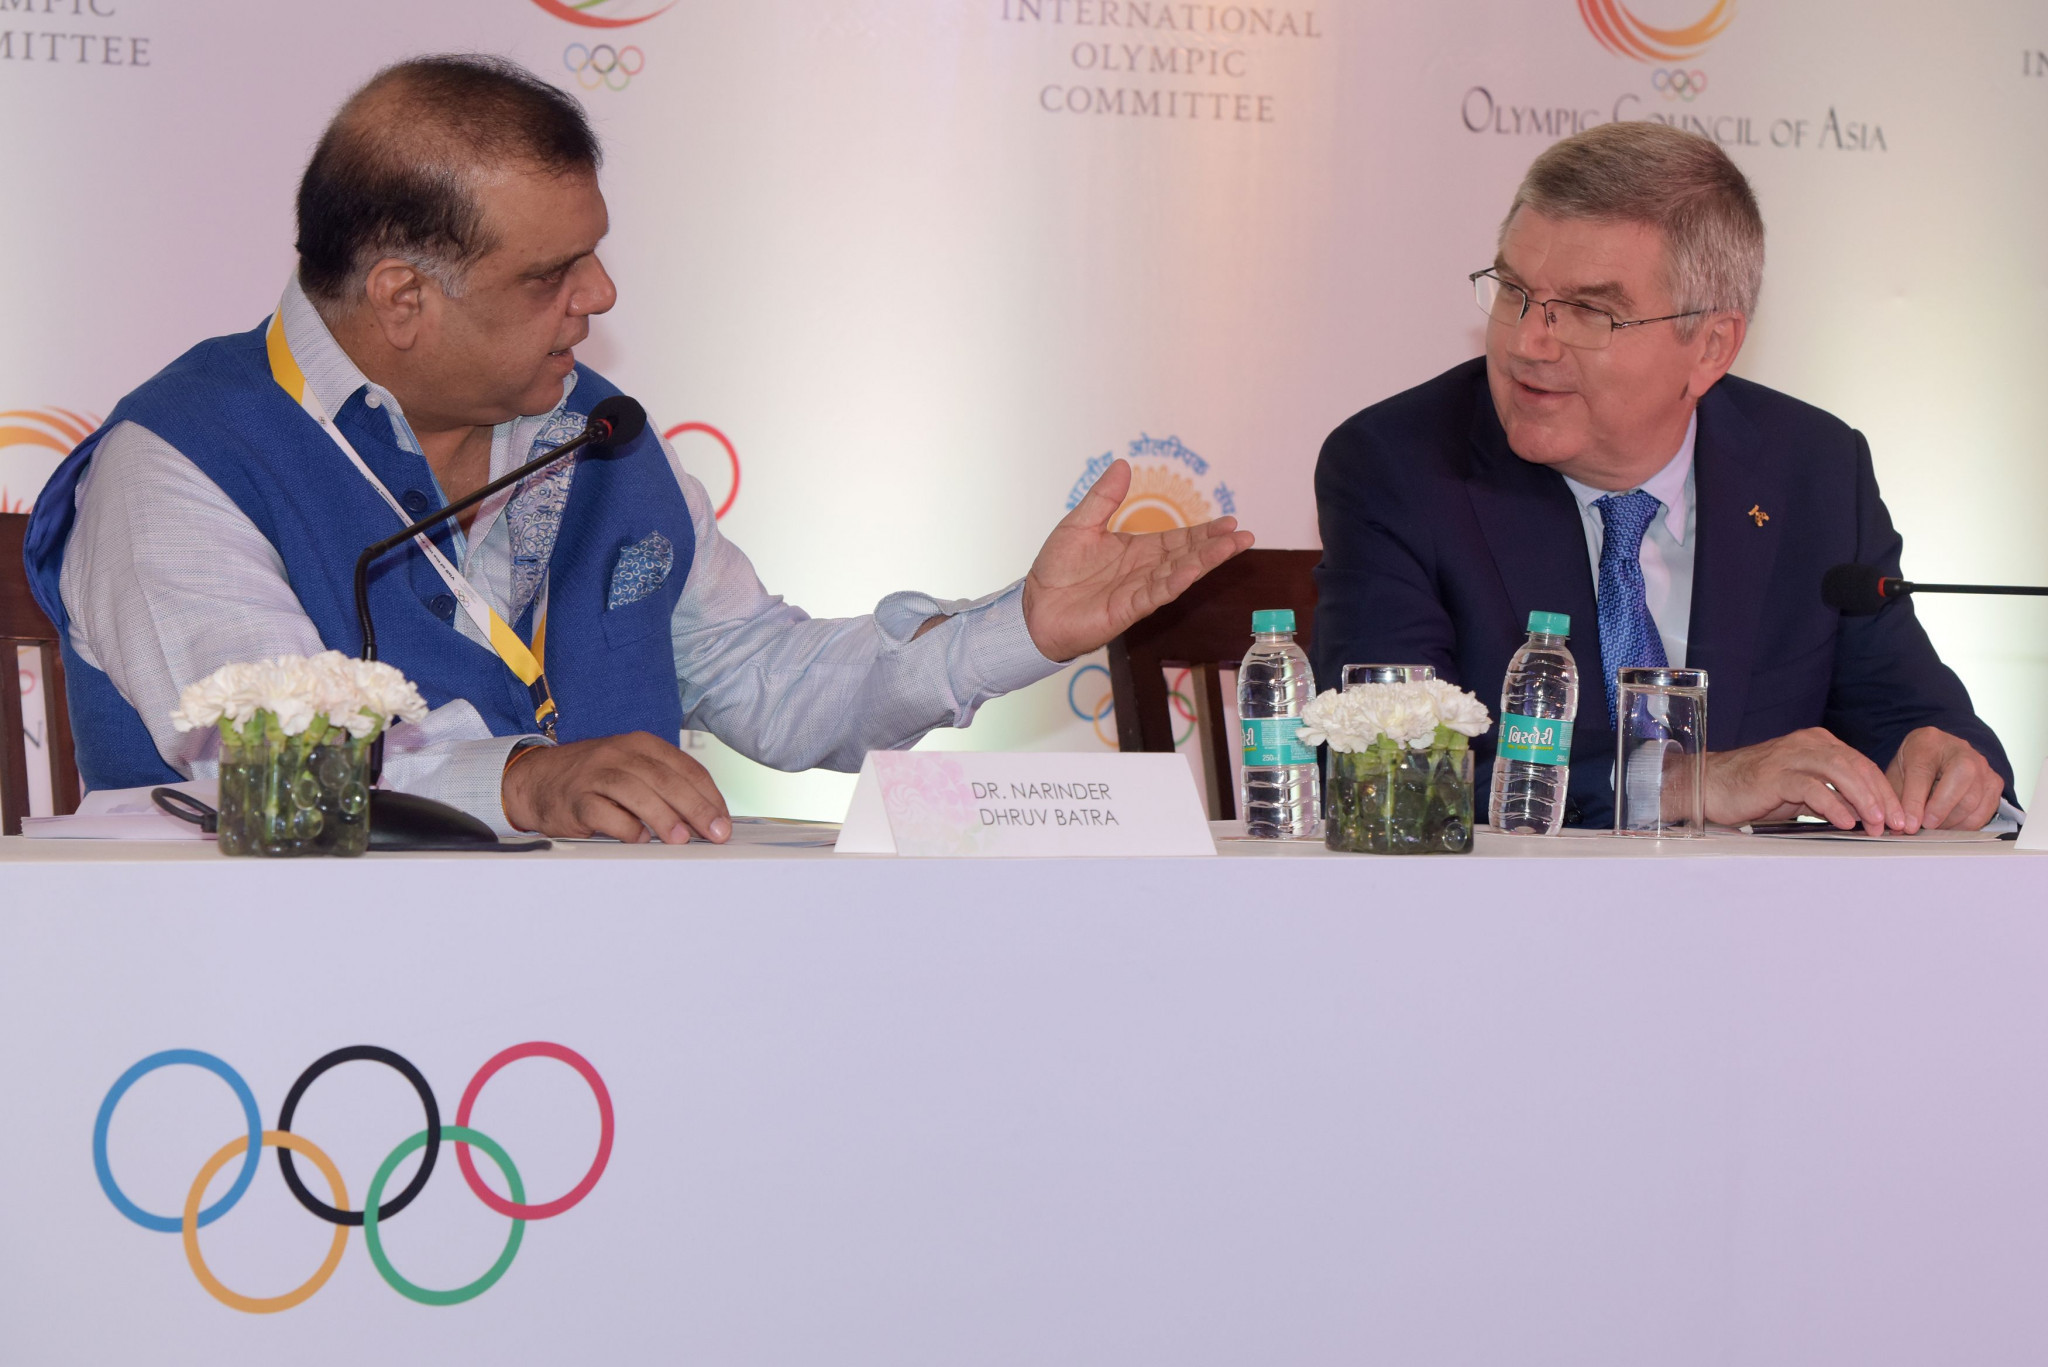 Batra claims India is serious about bidding for 2032 Olympics